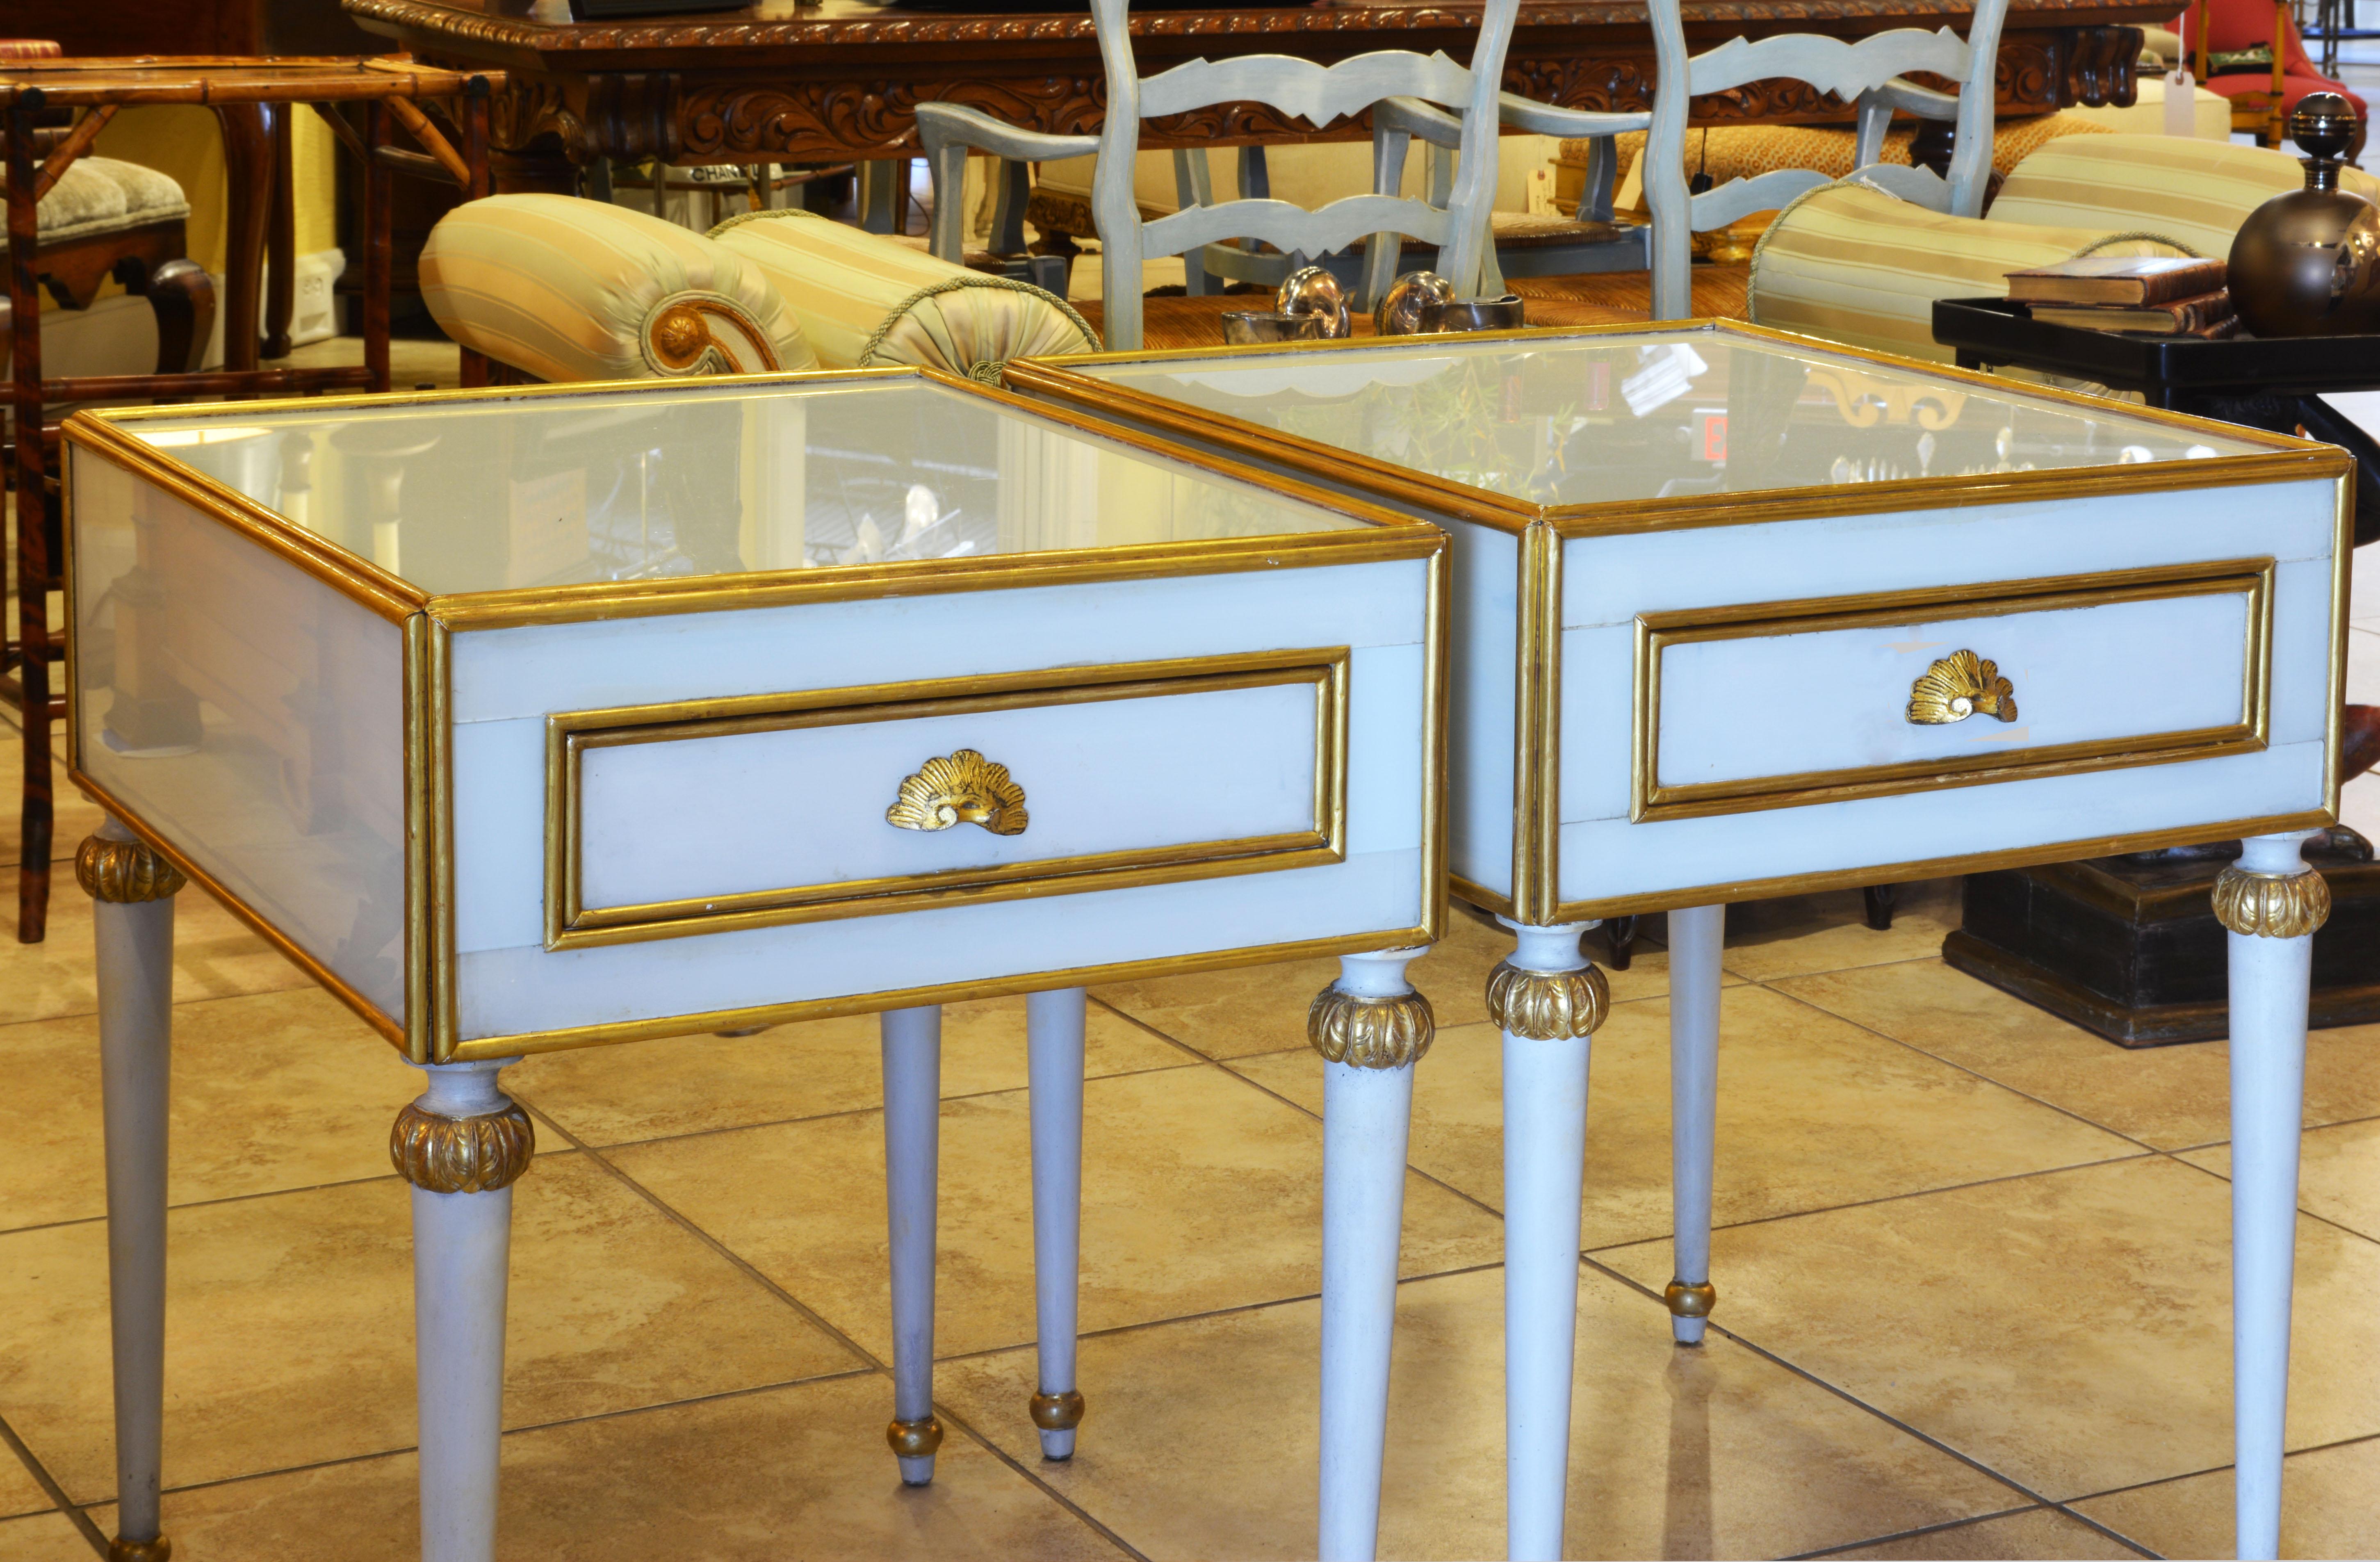 This unusual pair of French Louis XVI style milk glass mounted one drawer side tables feature bodies mounted with giltwood edged milk glass on top and sides resting on four round tapering legs with giltwood accents. The likely date to the